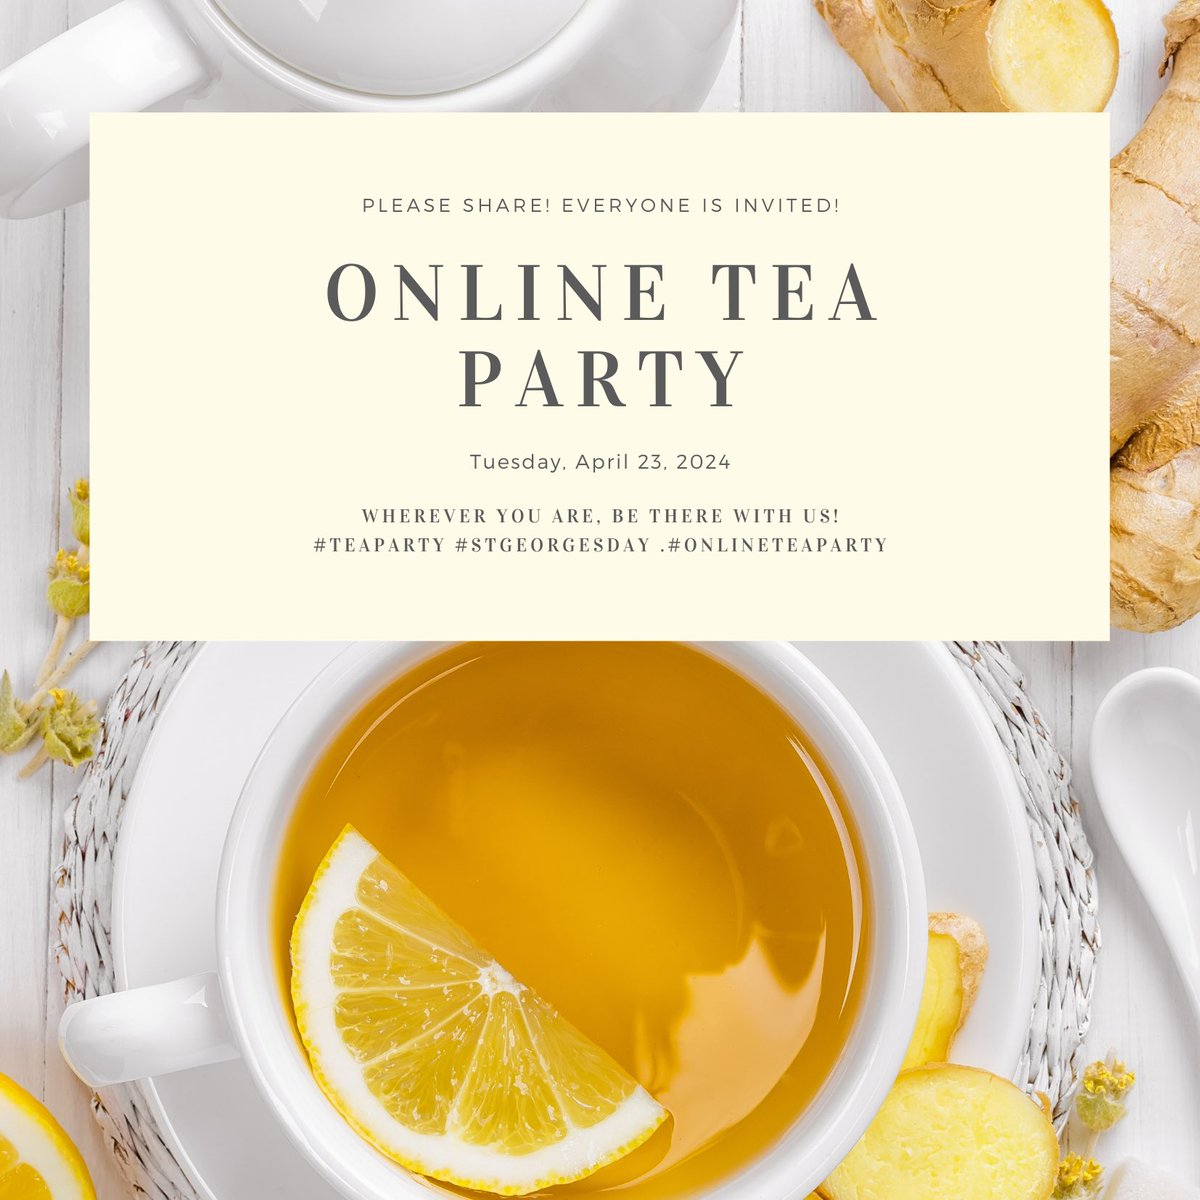 EVERYONE is INVITED to our #OnlineTeaParty! Please SHARE! When: Tuesday, April 23, 2024 Where: Virtual - Wherever you are! How: Enjoy a #TeaParty as FANCY as you want, as FUN as you want, as LOW-KEY as you want! 🫖 👗 There’s no wrong way to have a Tea Party with Us 😊! 🍪 🍰